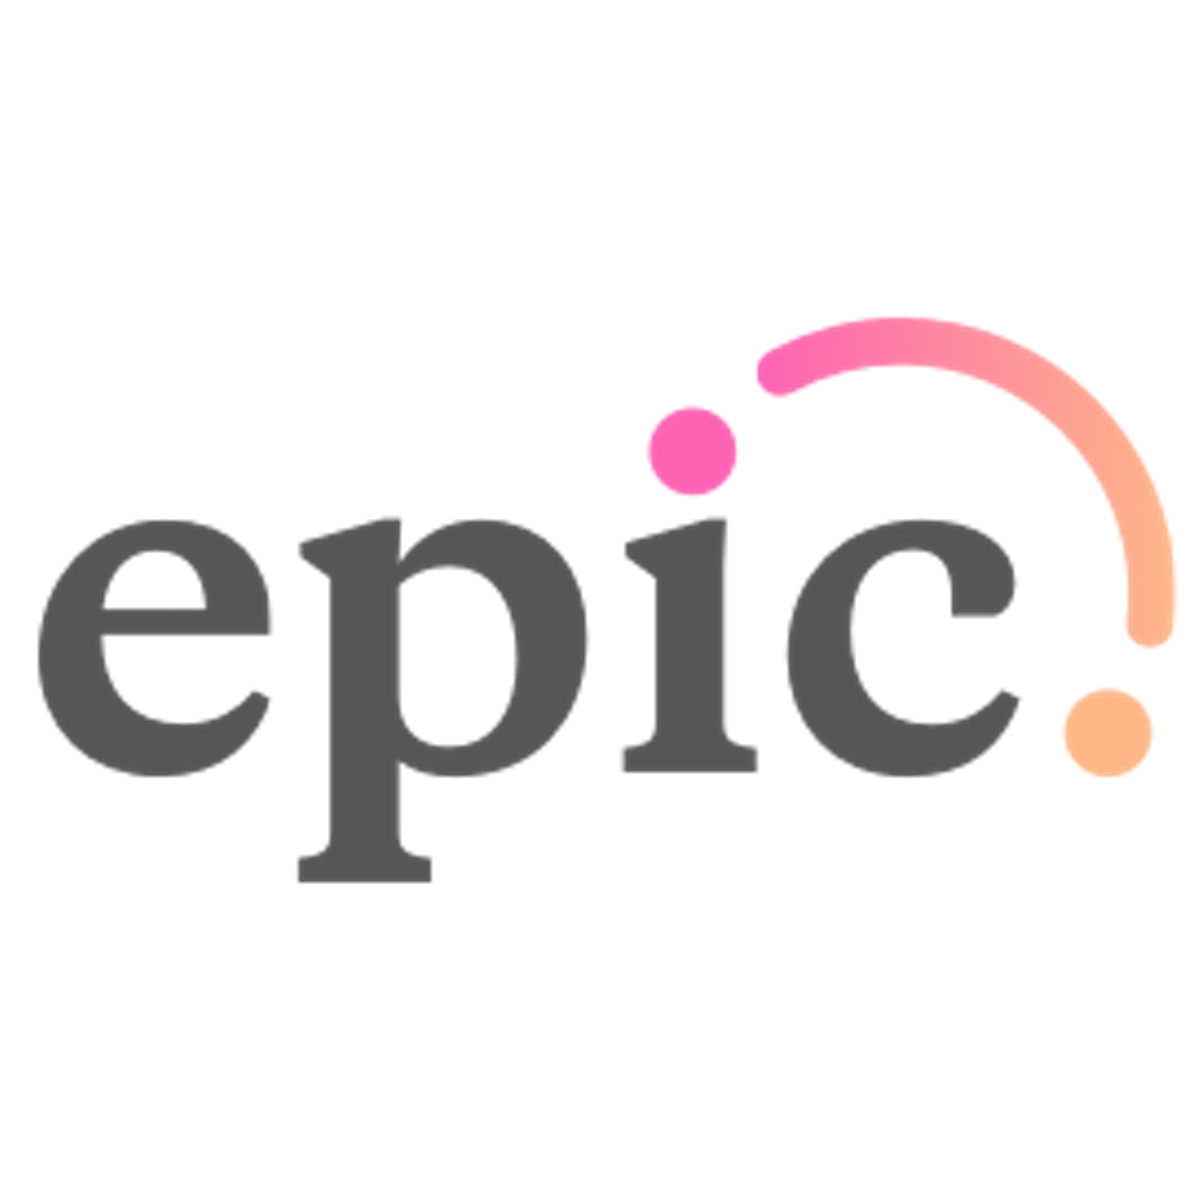 Hire Shopify Experts to integrate Epic Impact app into a Shopify store